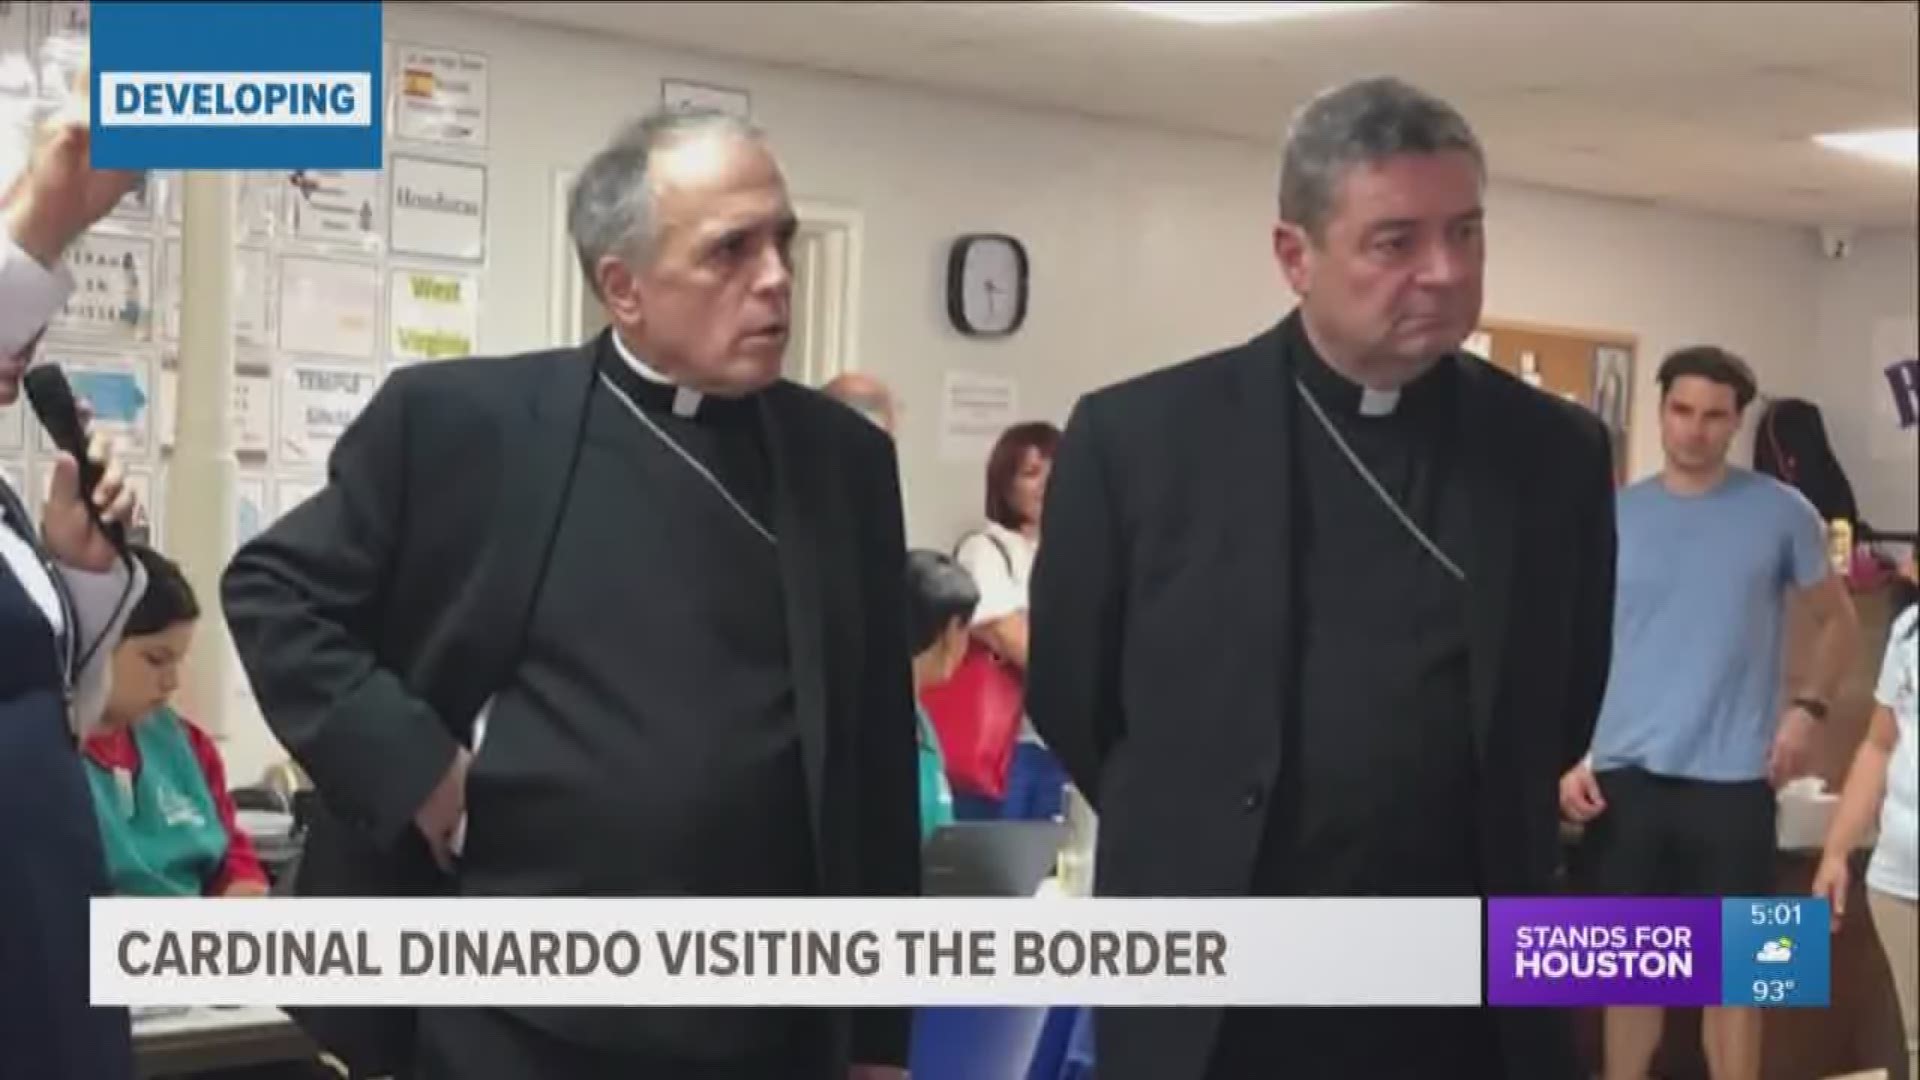 Cardinal Dinardo spent time along the border Monday to visit undocumented families about the immigration situation. 